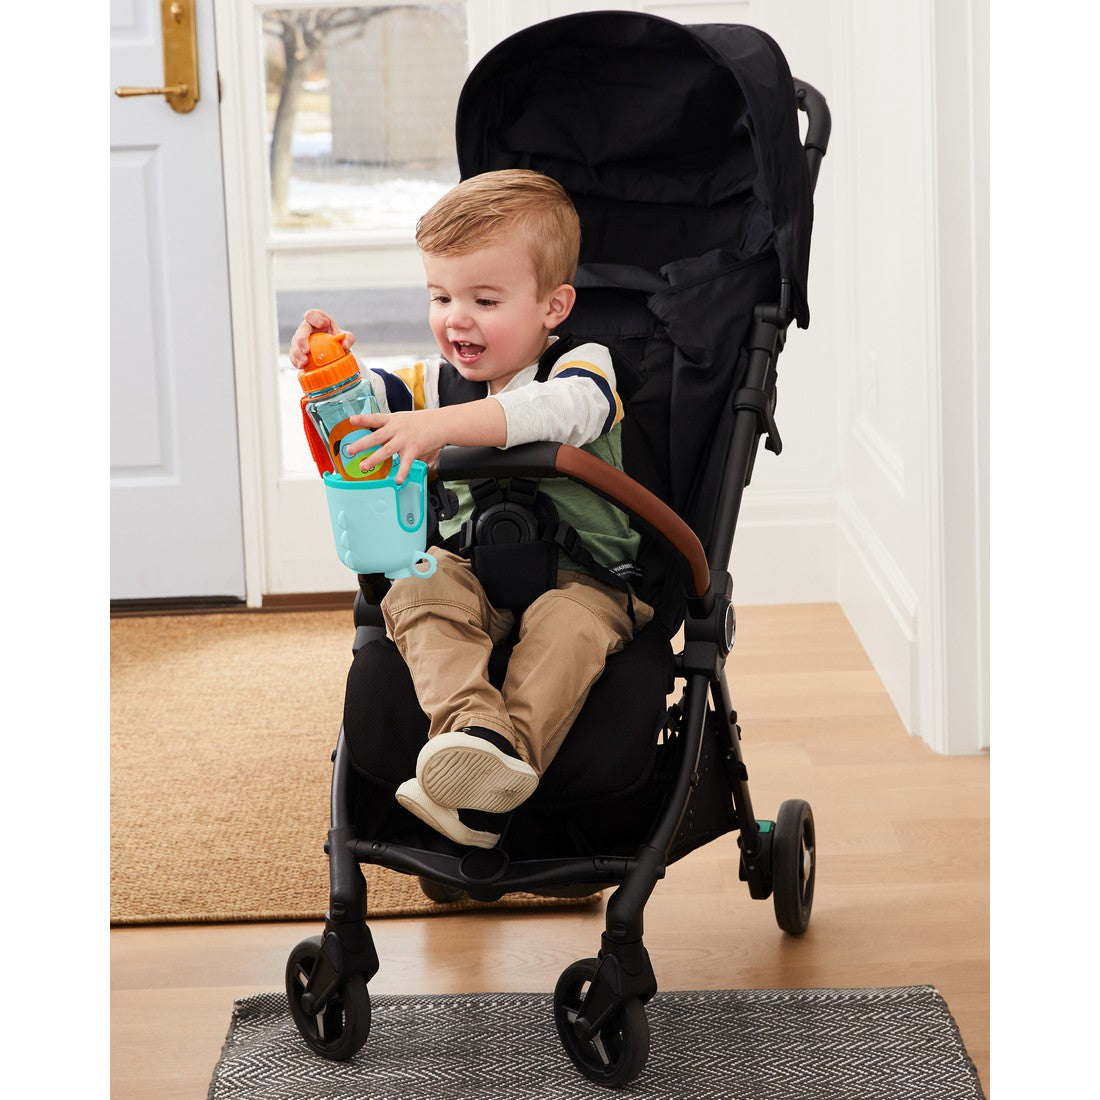 Skip Hop Stroll & Connect Universal Child Cup Holder On the Go Teal 11.9